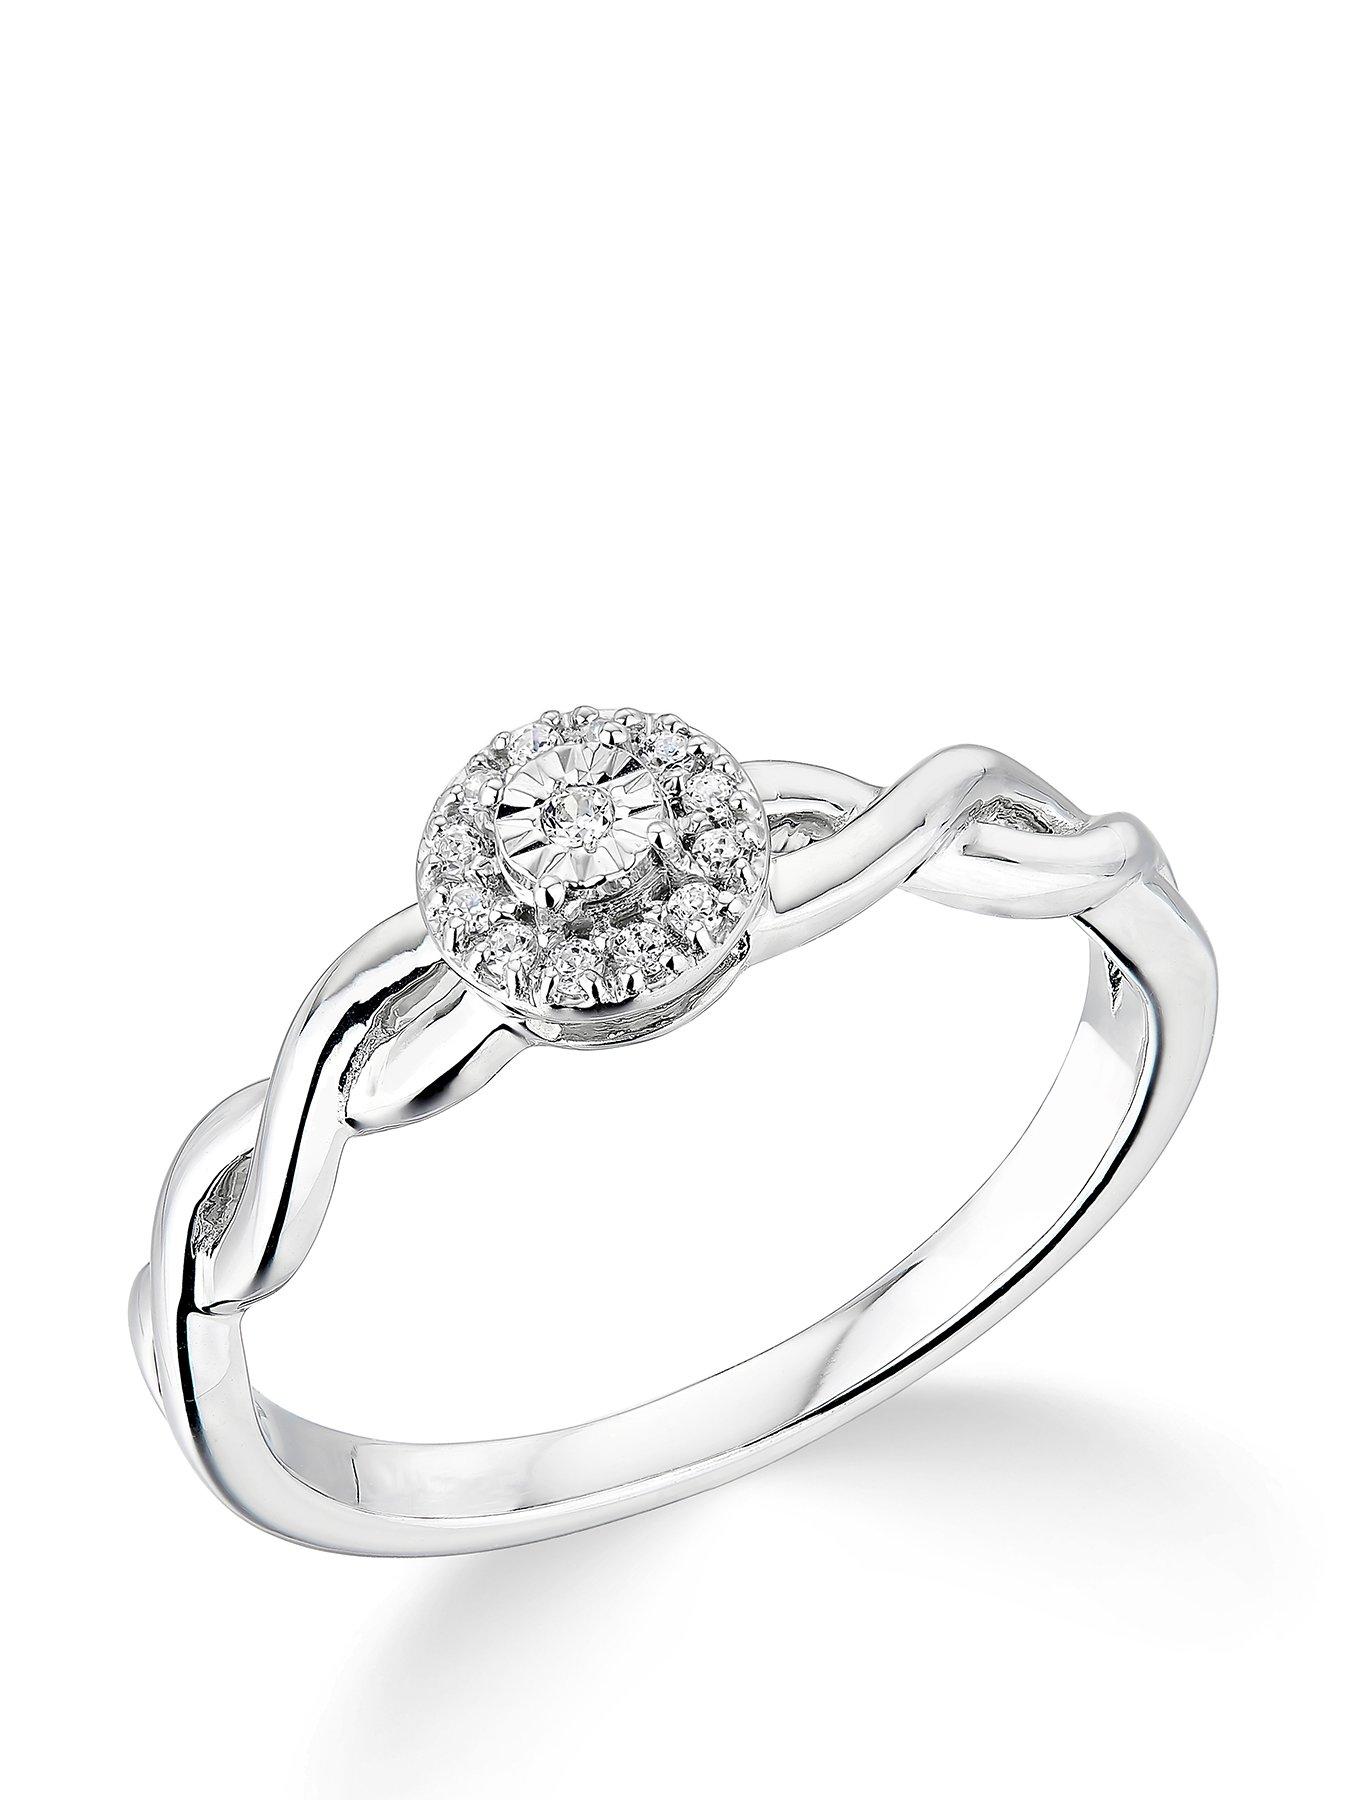  9K White Gold 0.10ct Cluster Ring With Twisted Shoulders